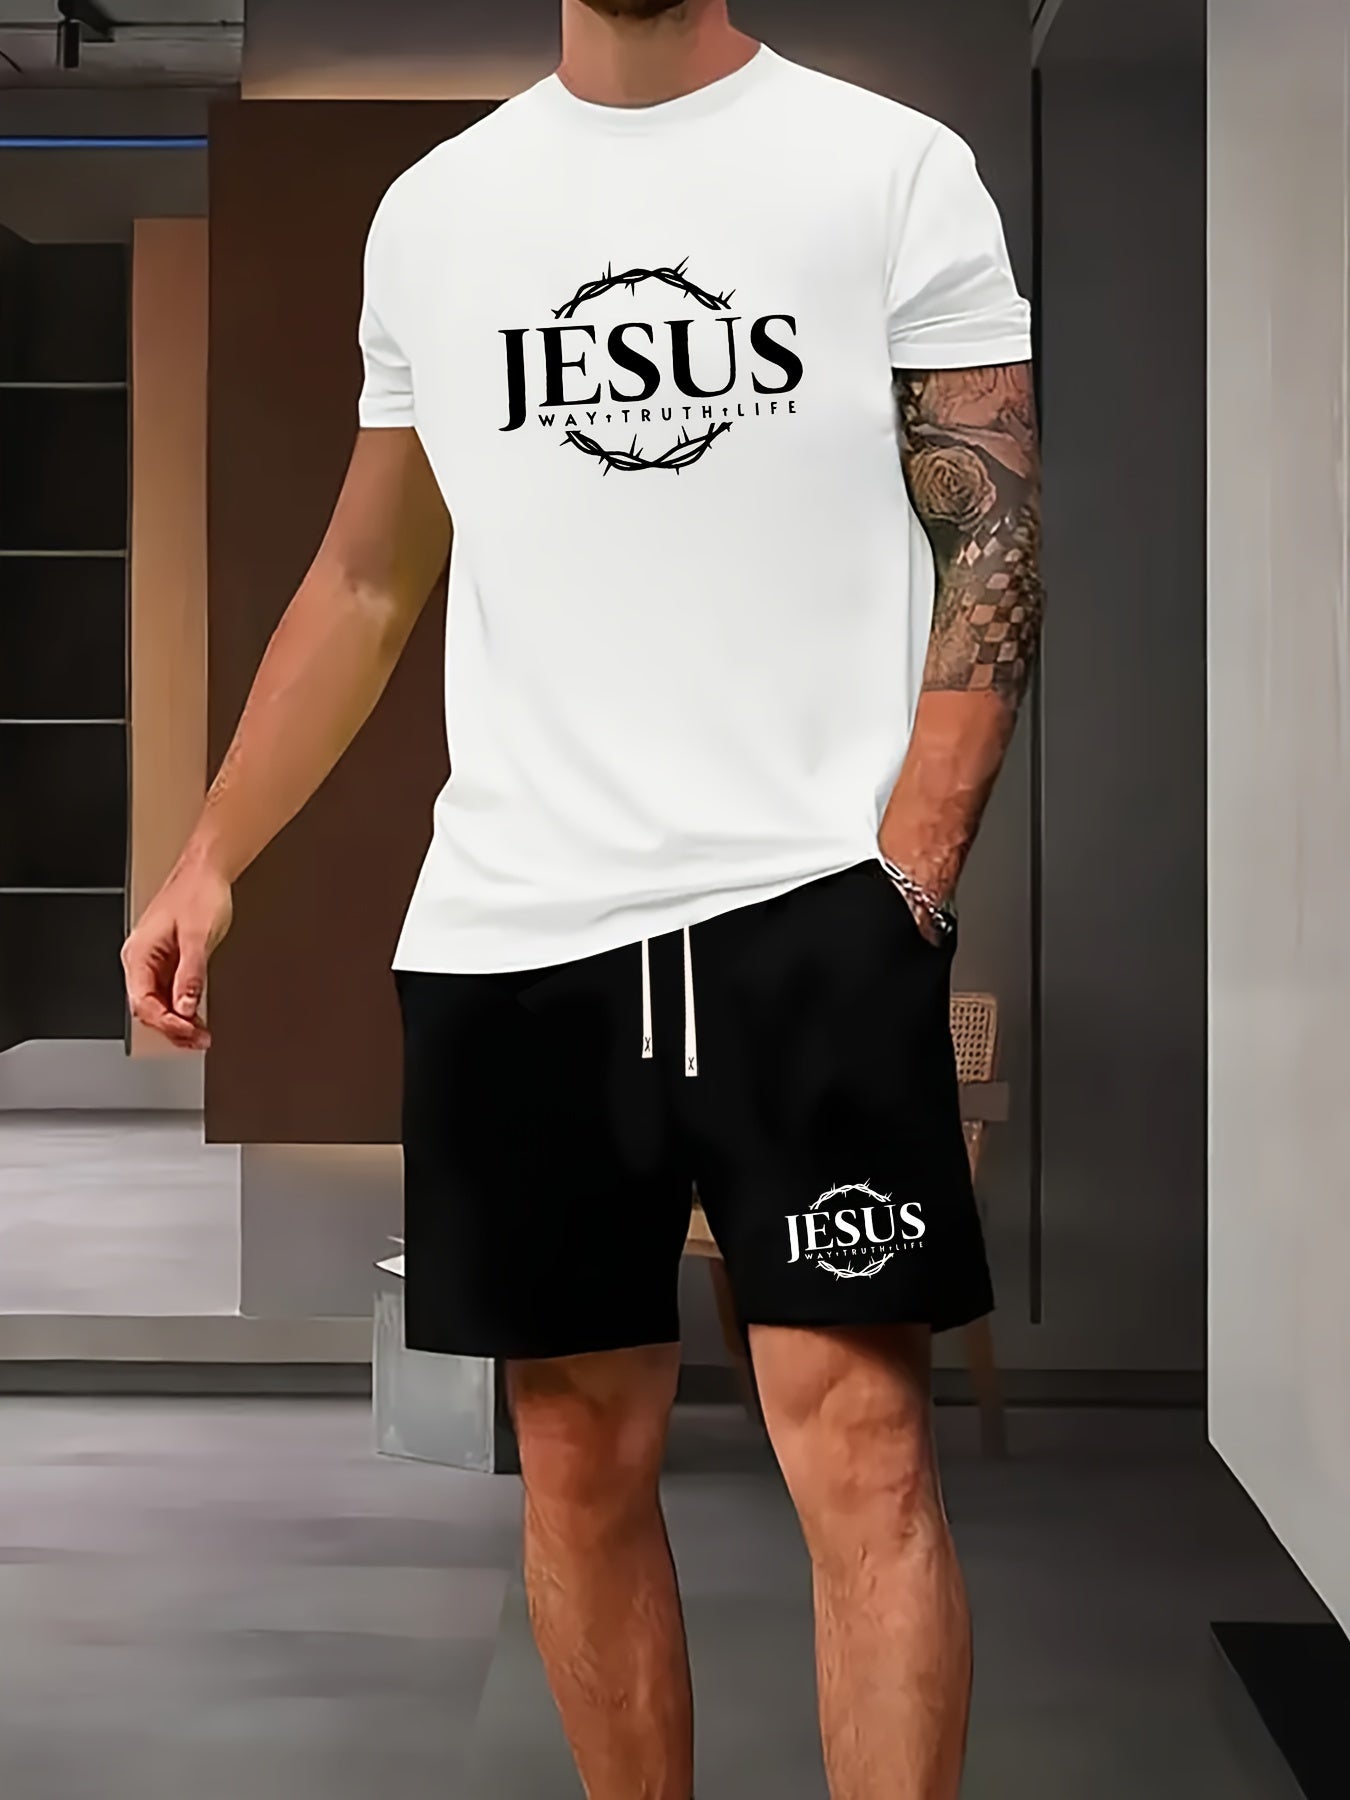 Jesus Way Truth Life Men's Christian Casual Outfit claimedbygoddesigns